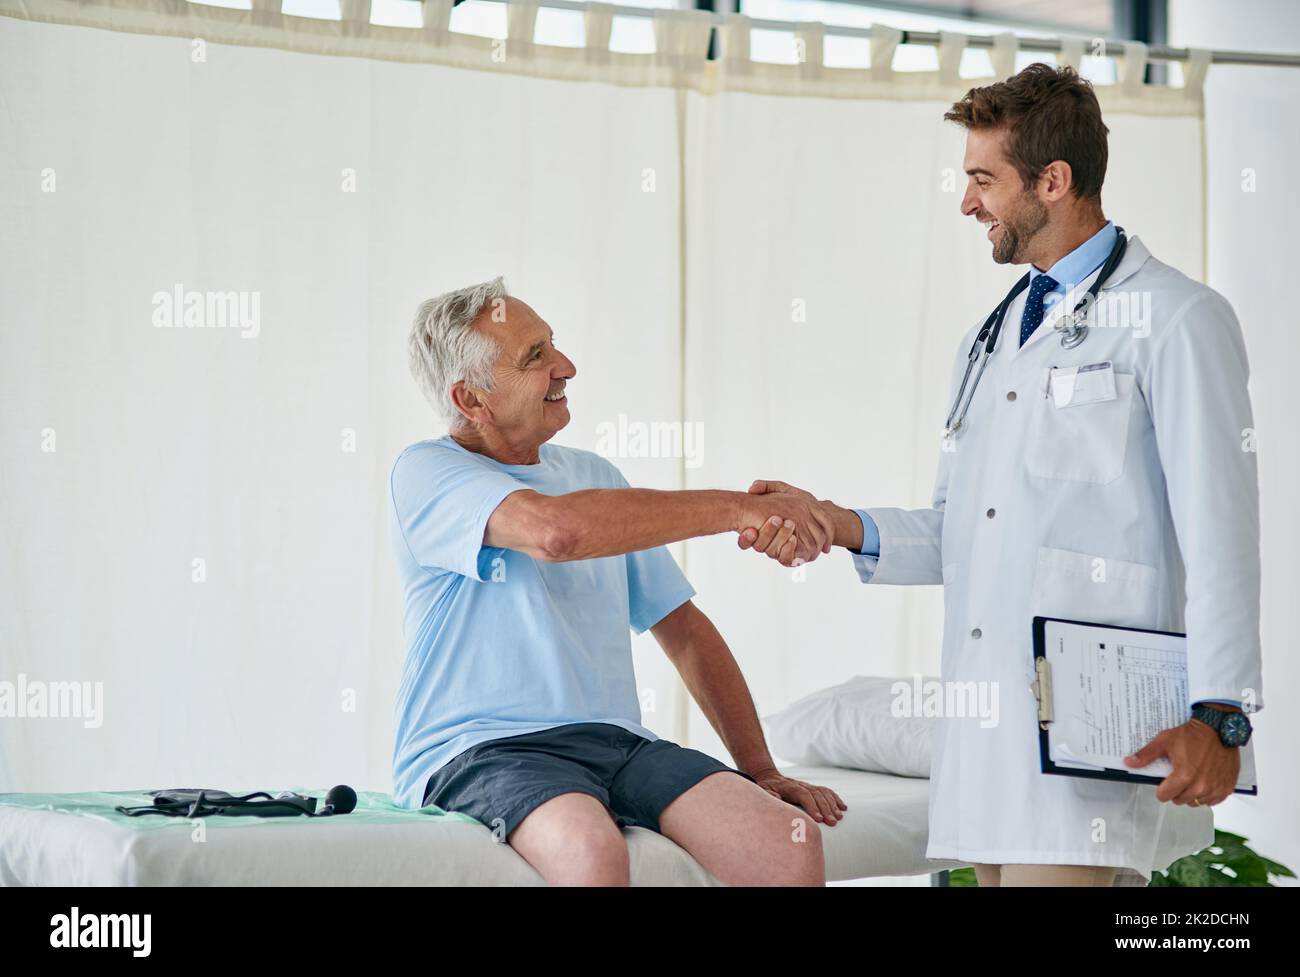 Looks like weve reached our goal. Cropped shot of a young male doctor shaking hands with an elderly patient in his office. Stock Photo